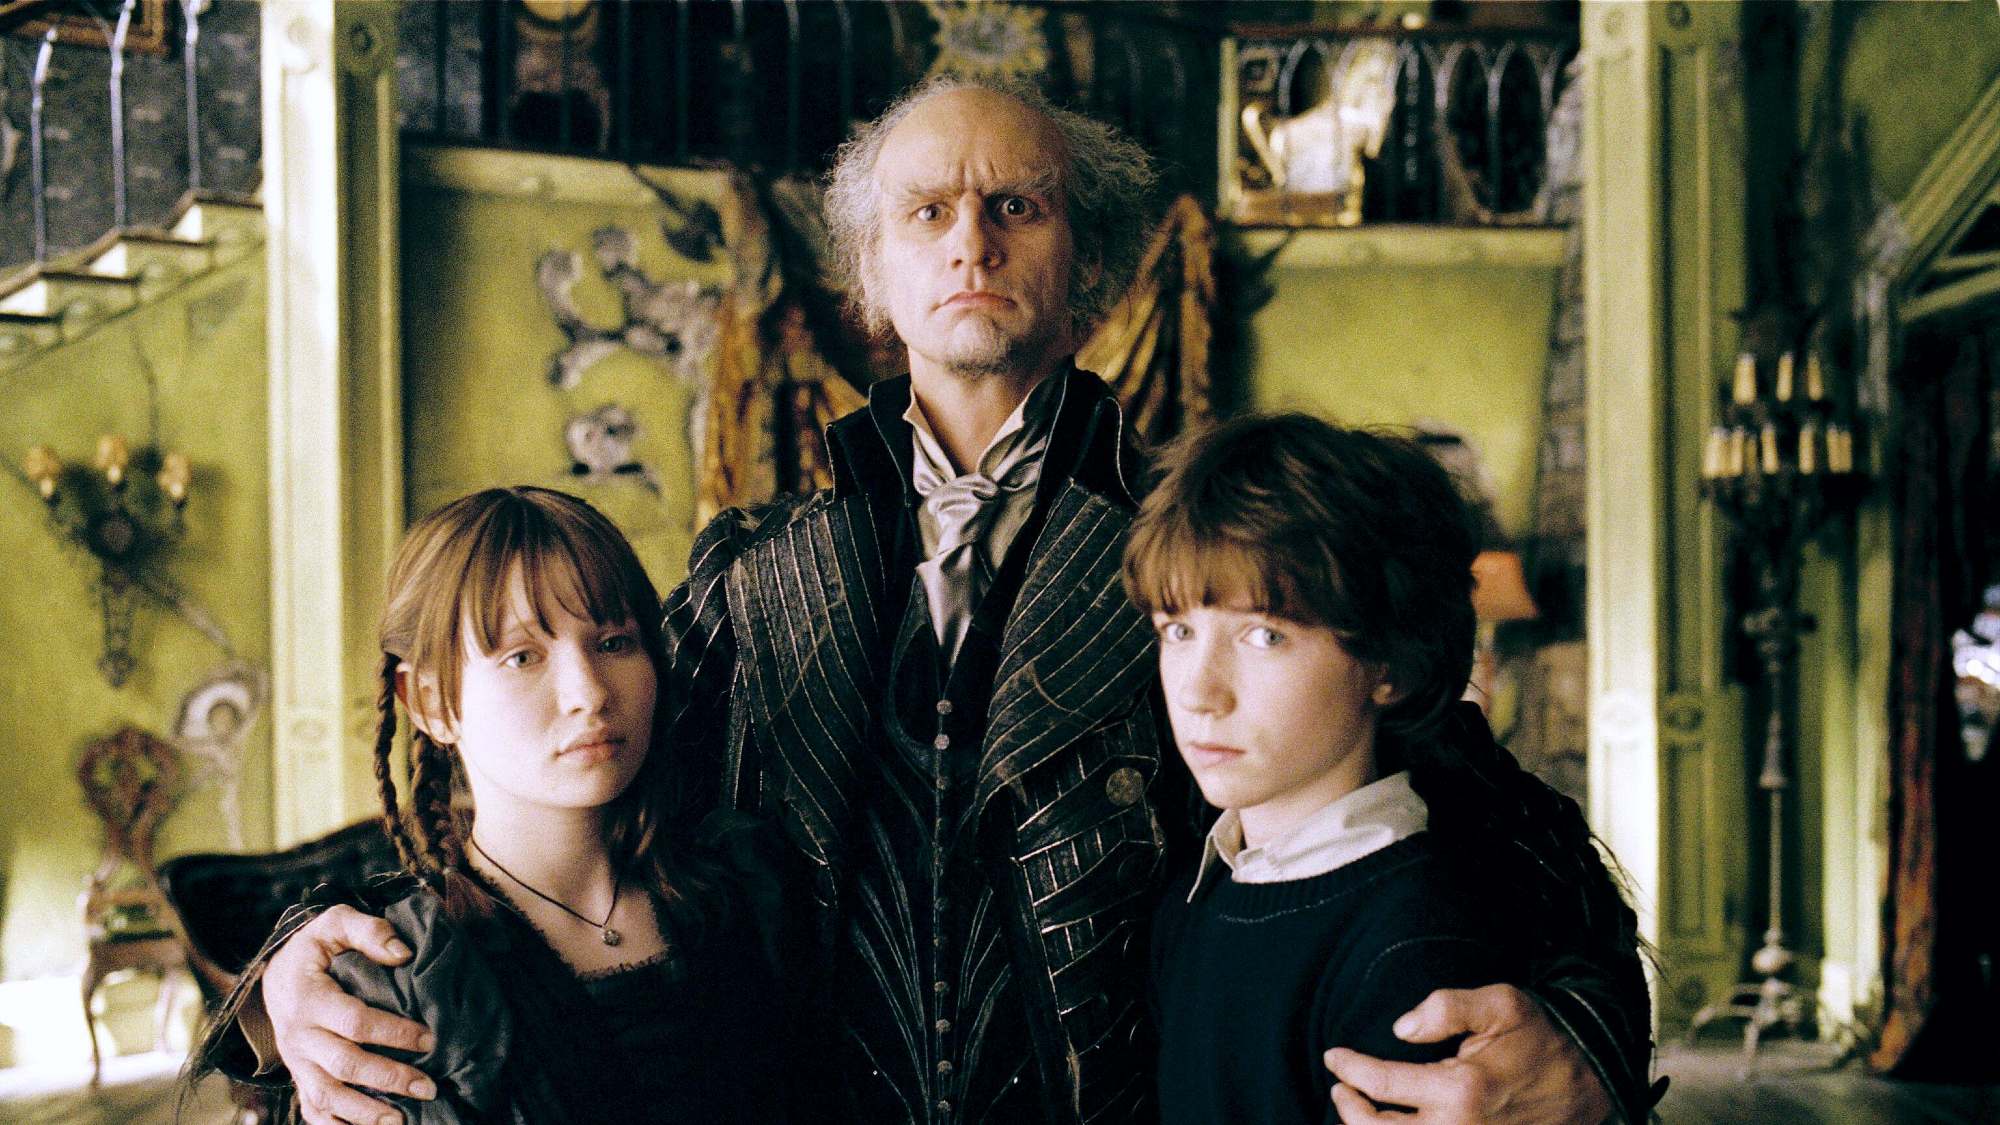 Emily Browning, Jim Carrey and Liam Aiken in Lemony Snicket's A Series of Unfortunate Events